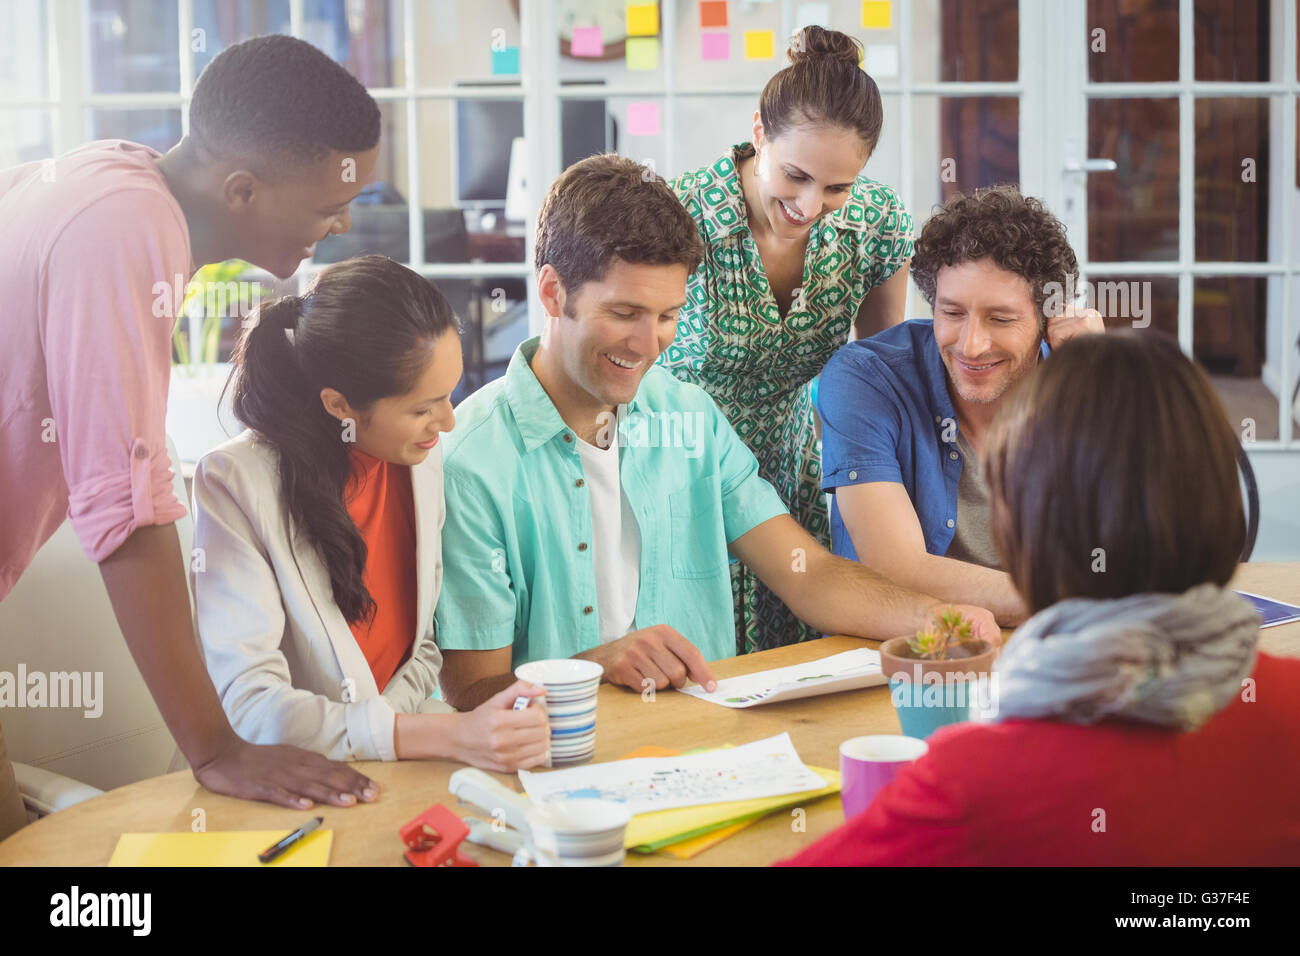 Business people working together Stock Photo